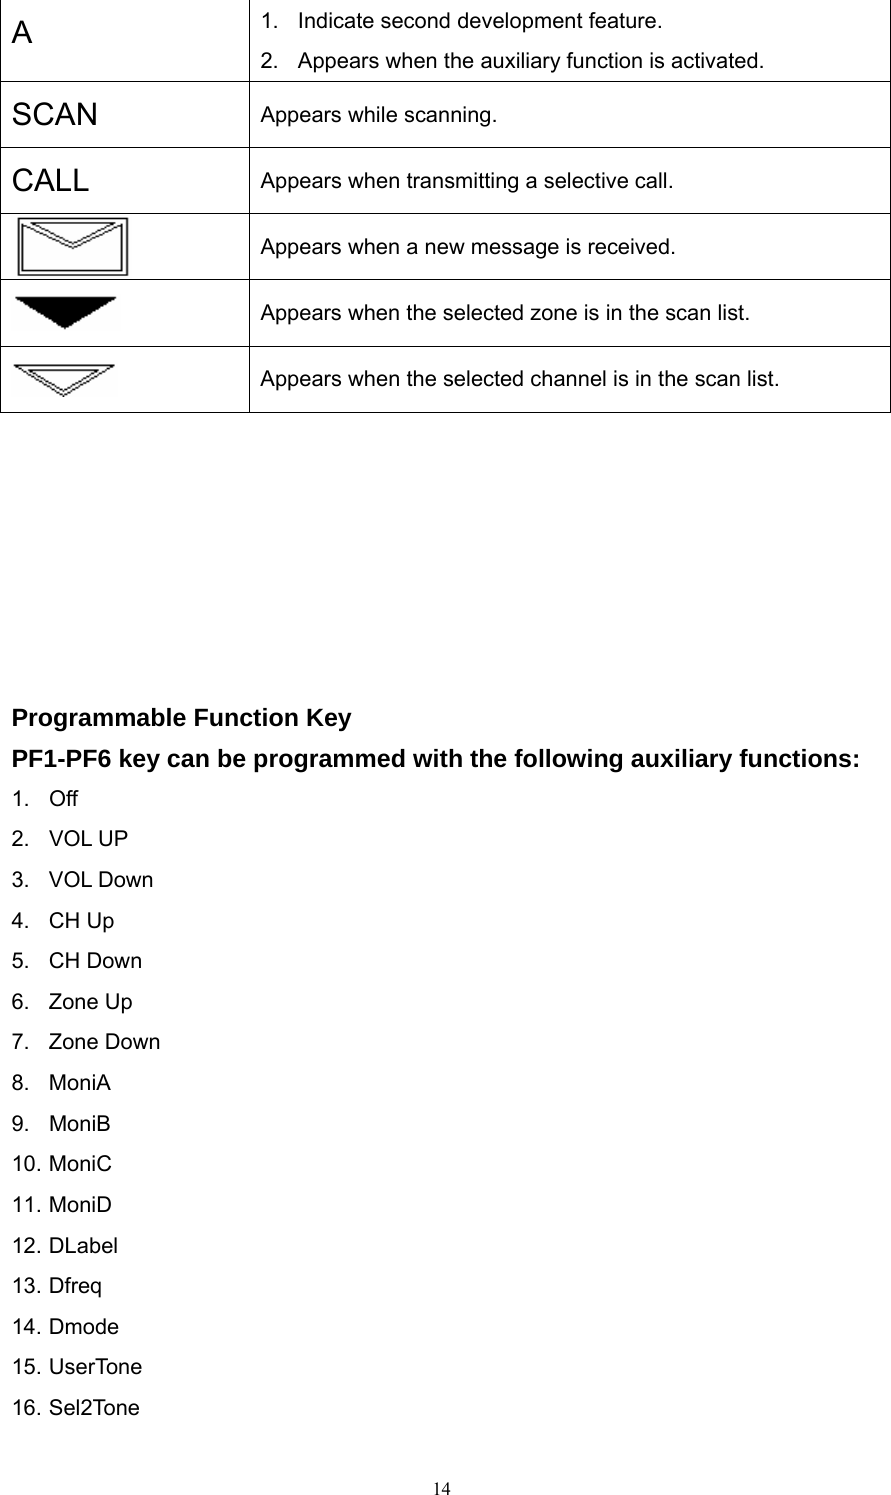 A 1.  Indicate second development feature. 2.  Appears when the auxiliary function is activated. SCAN Appears while scanning. CALL Appears when transmitting a selective call.  Appears when a new message is received.  Appears when the selected zone is in the scan list.  Appears when the selected channel is in the scan list.        Programmable Function Key PF1-PF6 key can be programmed with the following auxiliary functions: 1. Off 2. VOL UP 3. VOL Down 4. CH Up  5. CH Down  6. Zone Up  7. Zone Down  8. MoniA  9. MoniB  10. MoniC   11. MoniD   12. DLabel   13. Dfreq   14. Dmode   15. UserTone   16. Sel2Tone    14   